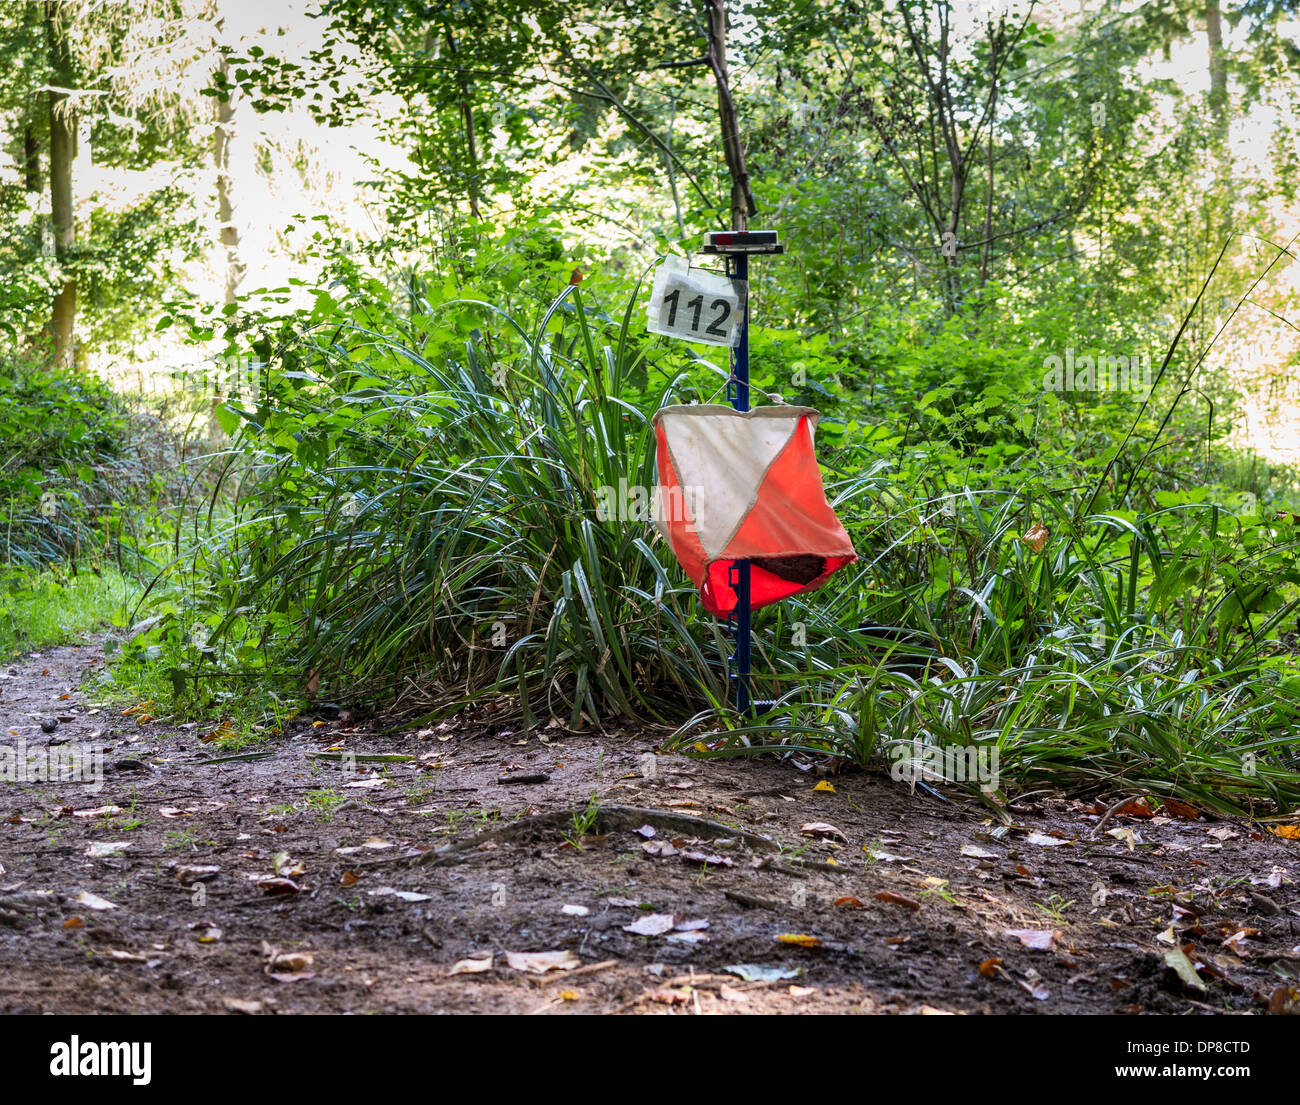 Orienteering Equipment in the Forest Stock Photo